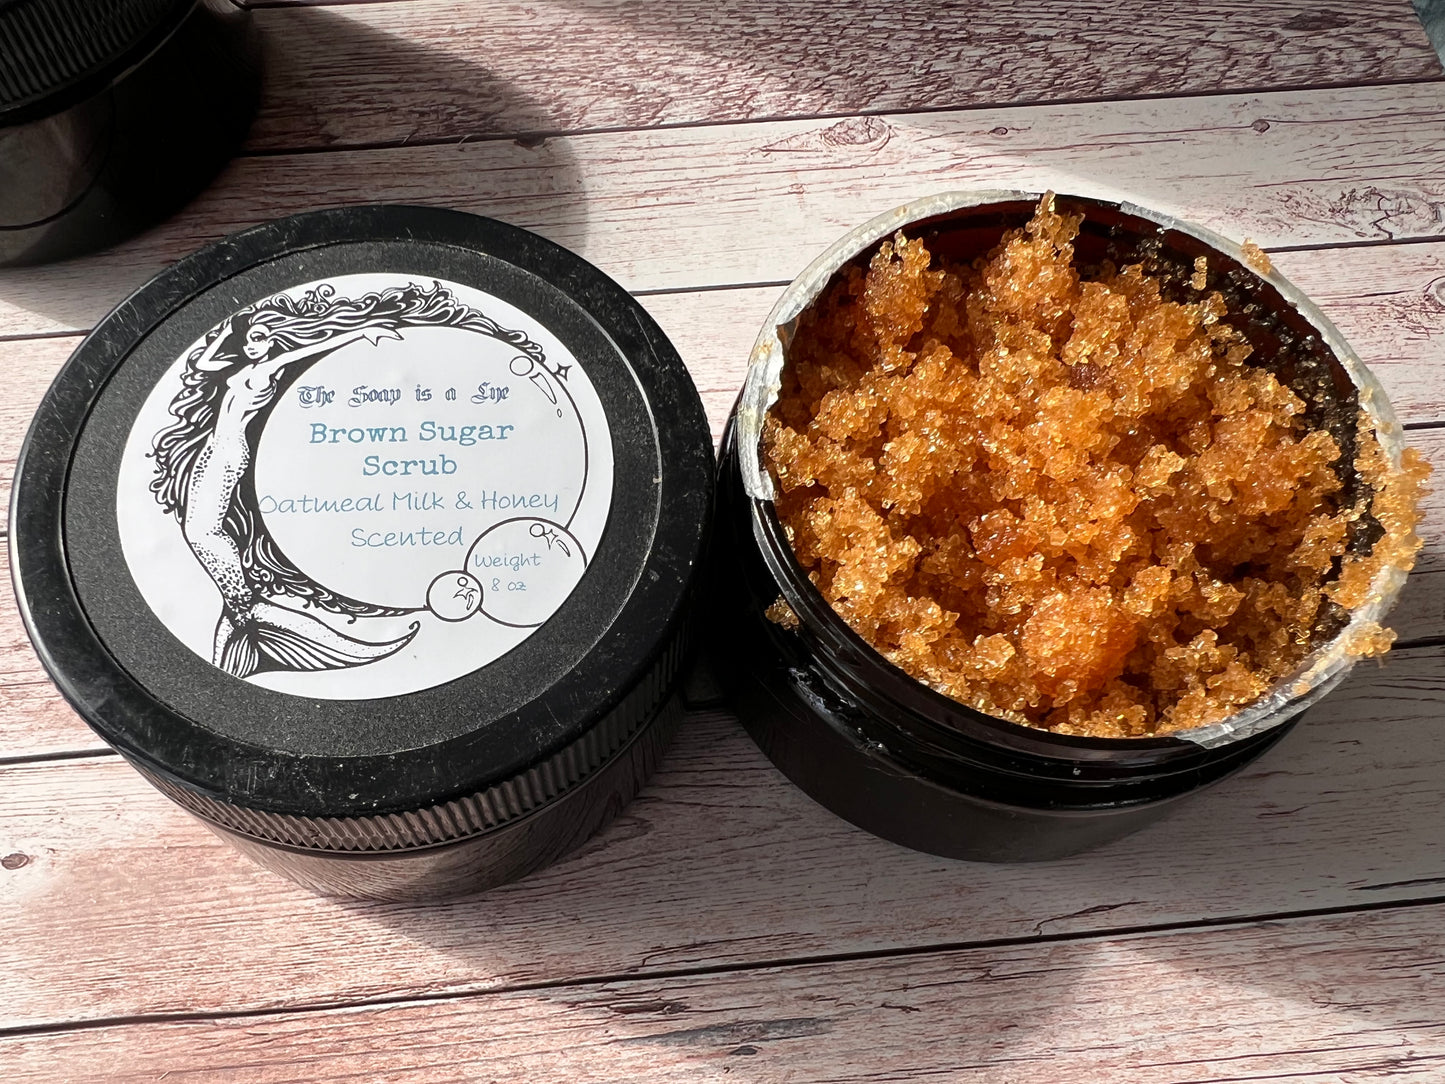 Oatmeal Milk and Honey Brown Sugar Scrub - 8 oz containers